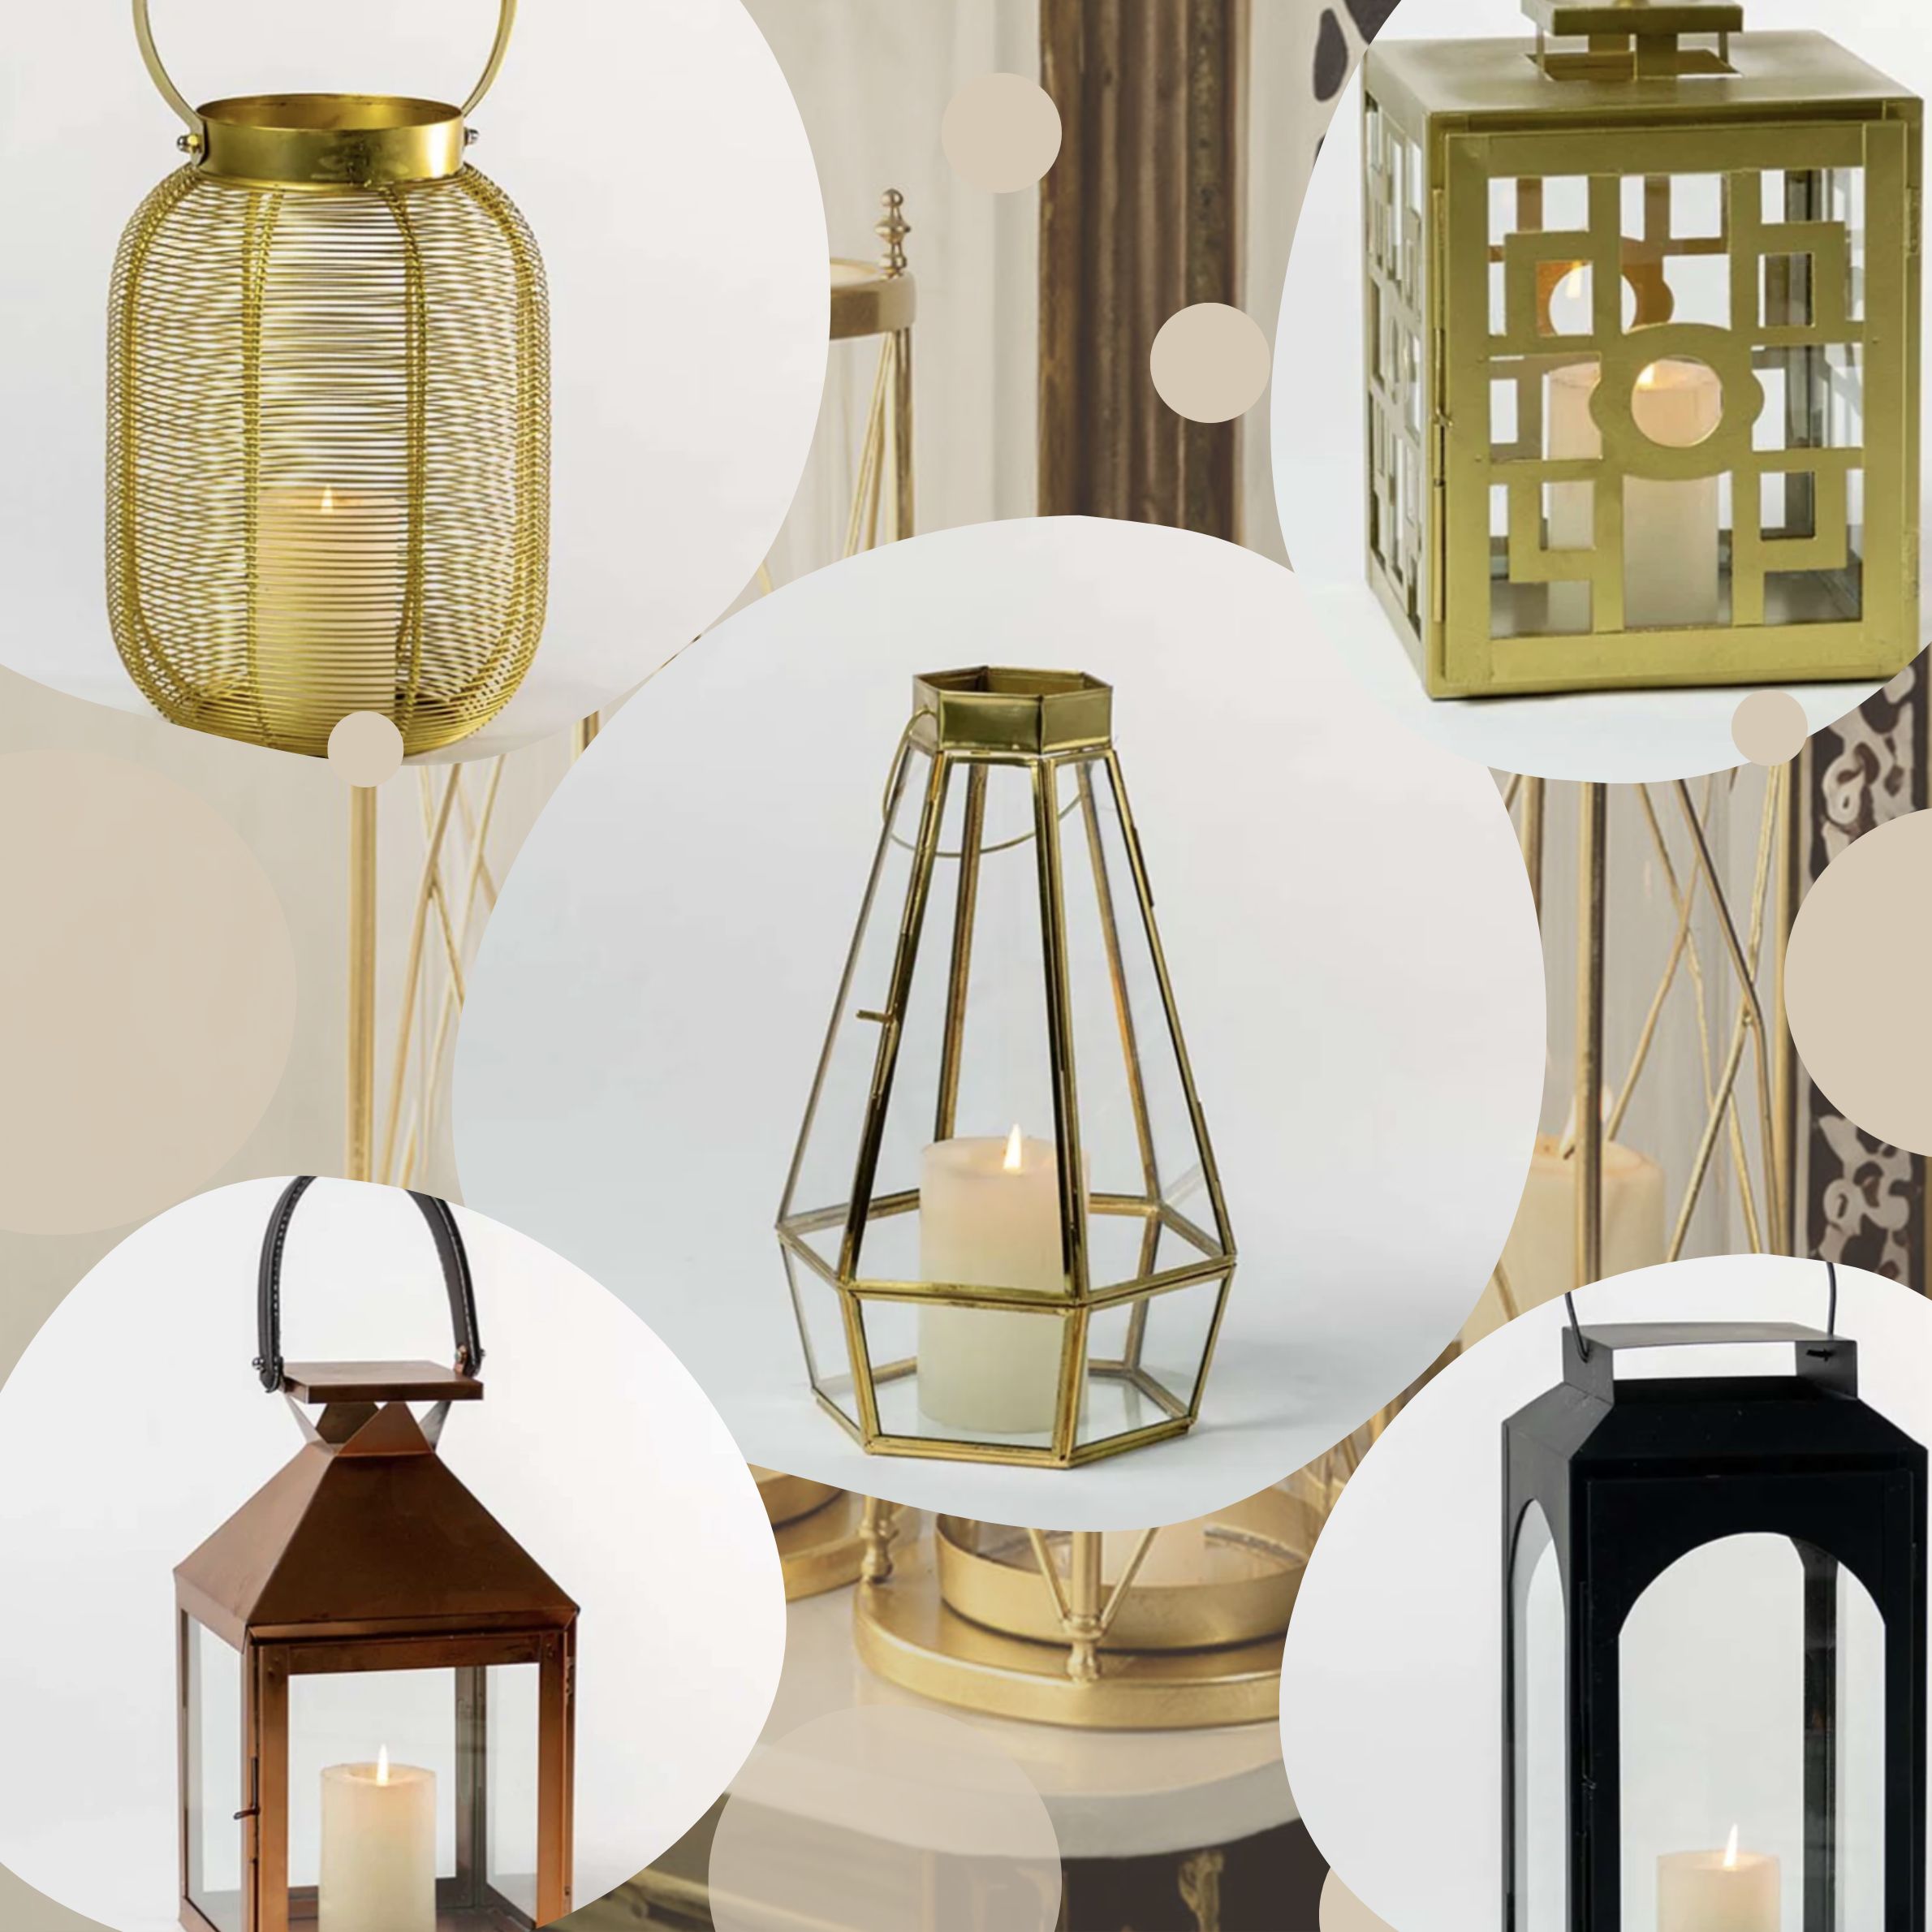 How to Decorate With Lanterns – Inside and Out!